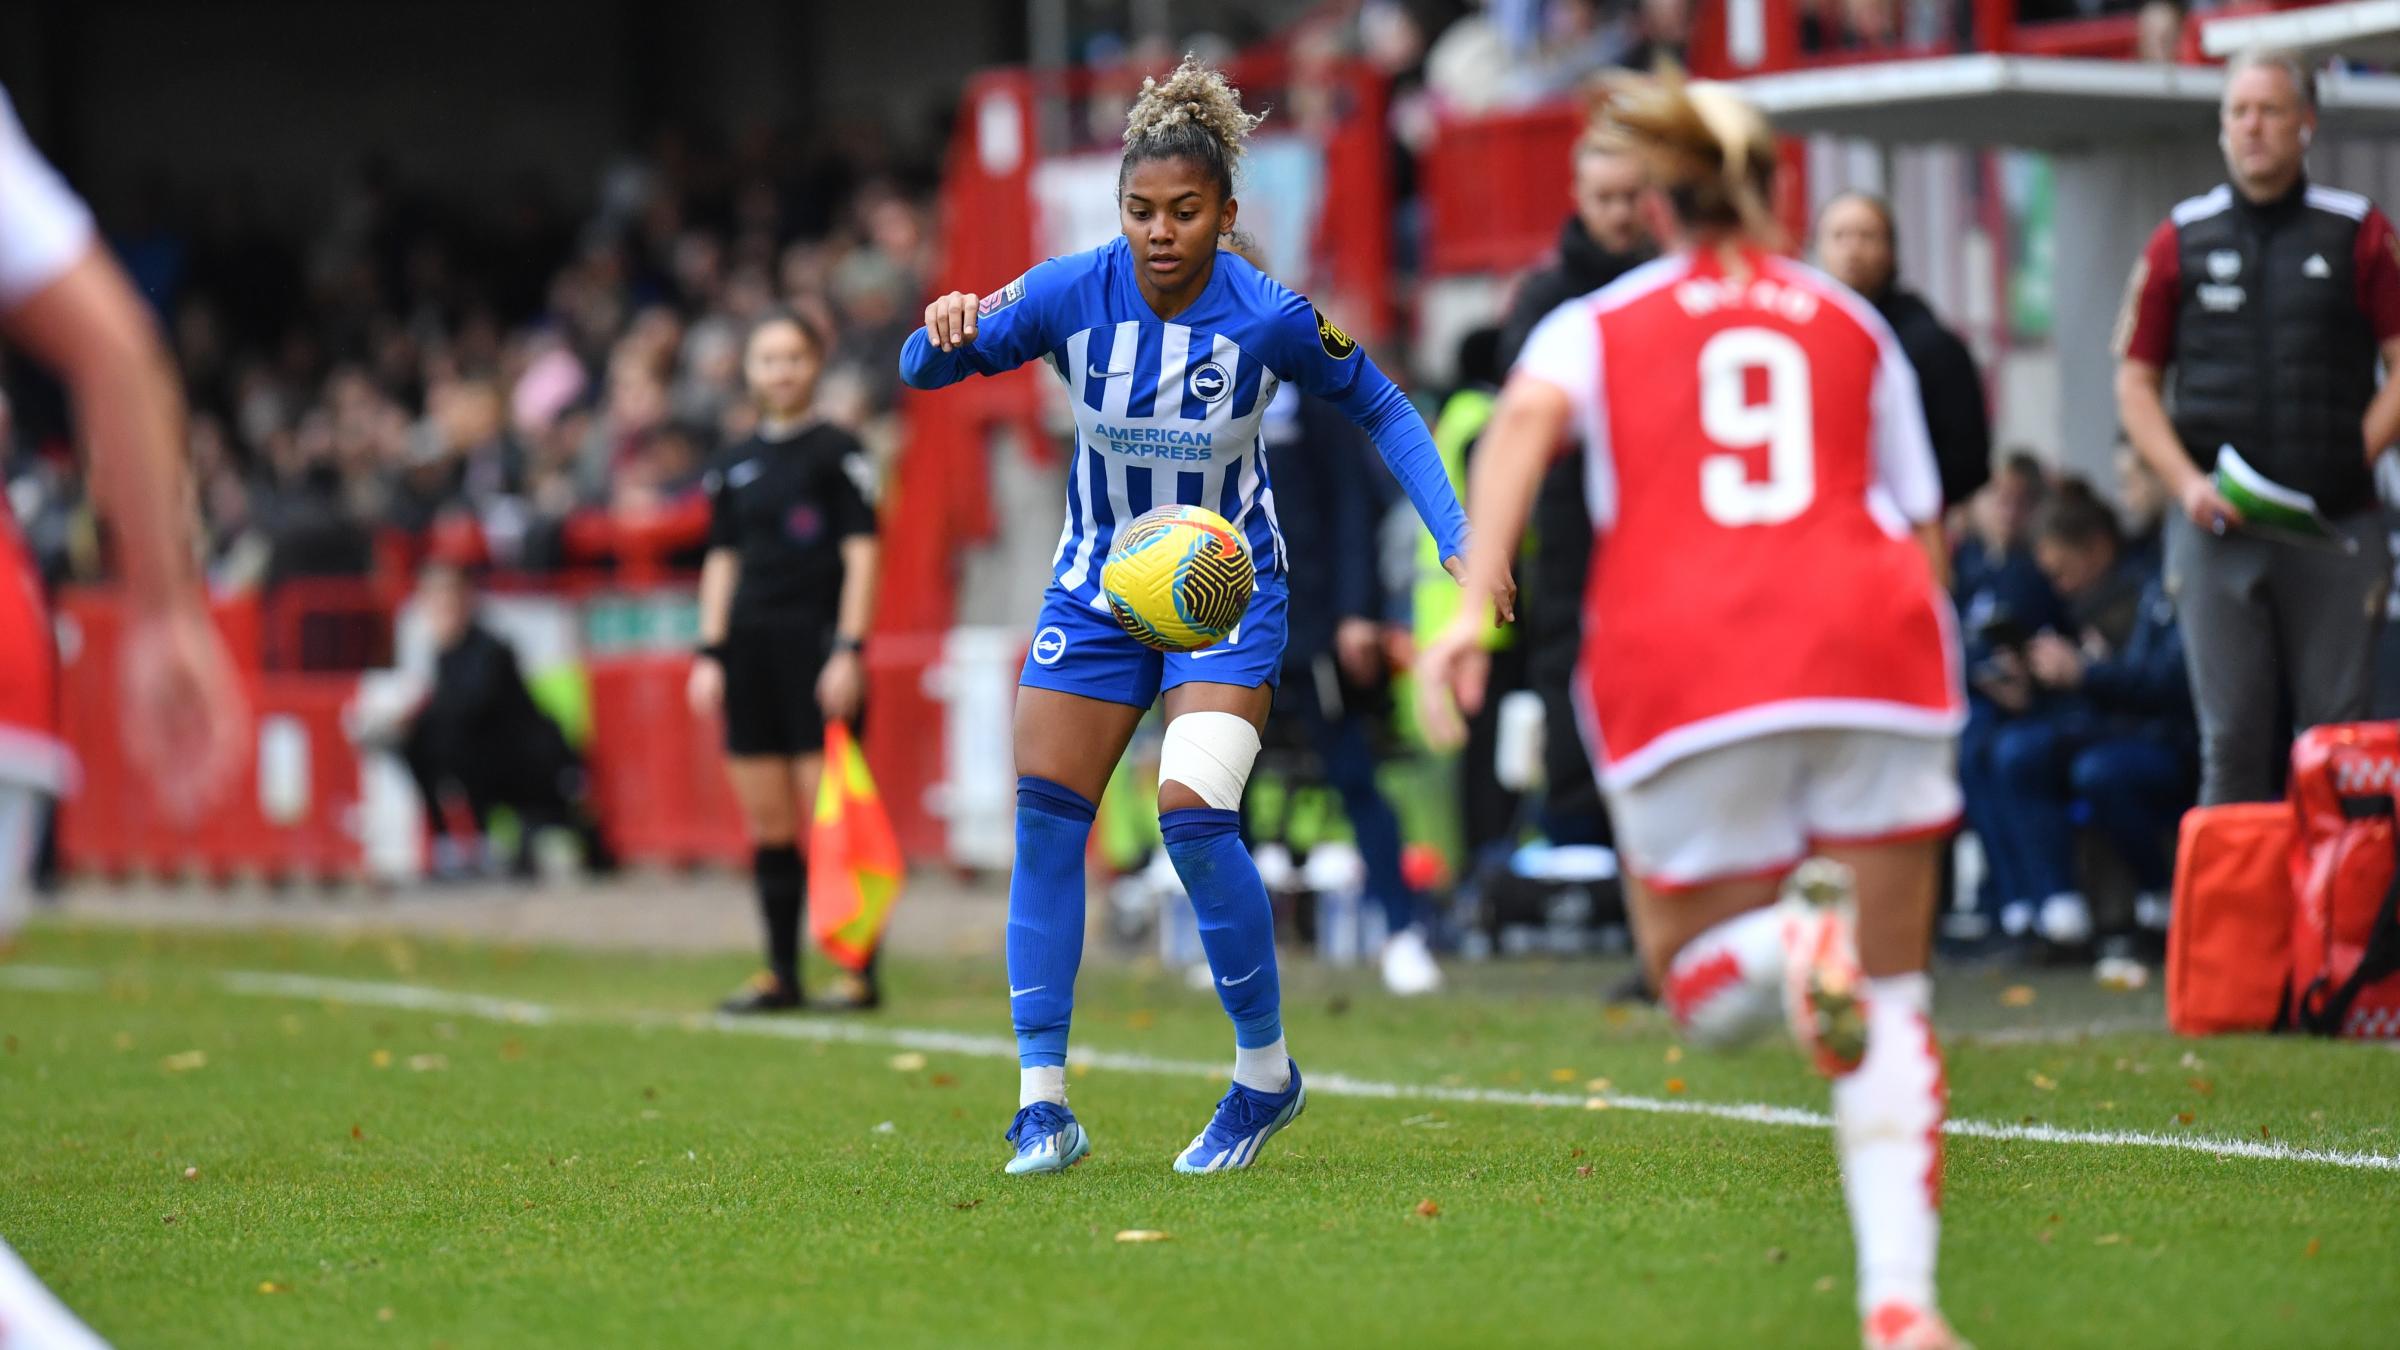 Brighton lose 3-0 to Arsenal before 4,921 at Crawley in WSL